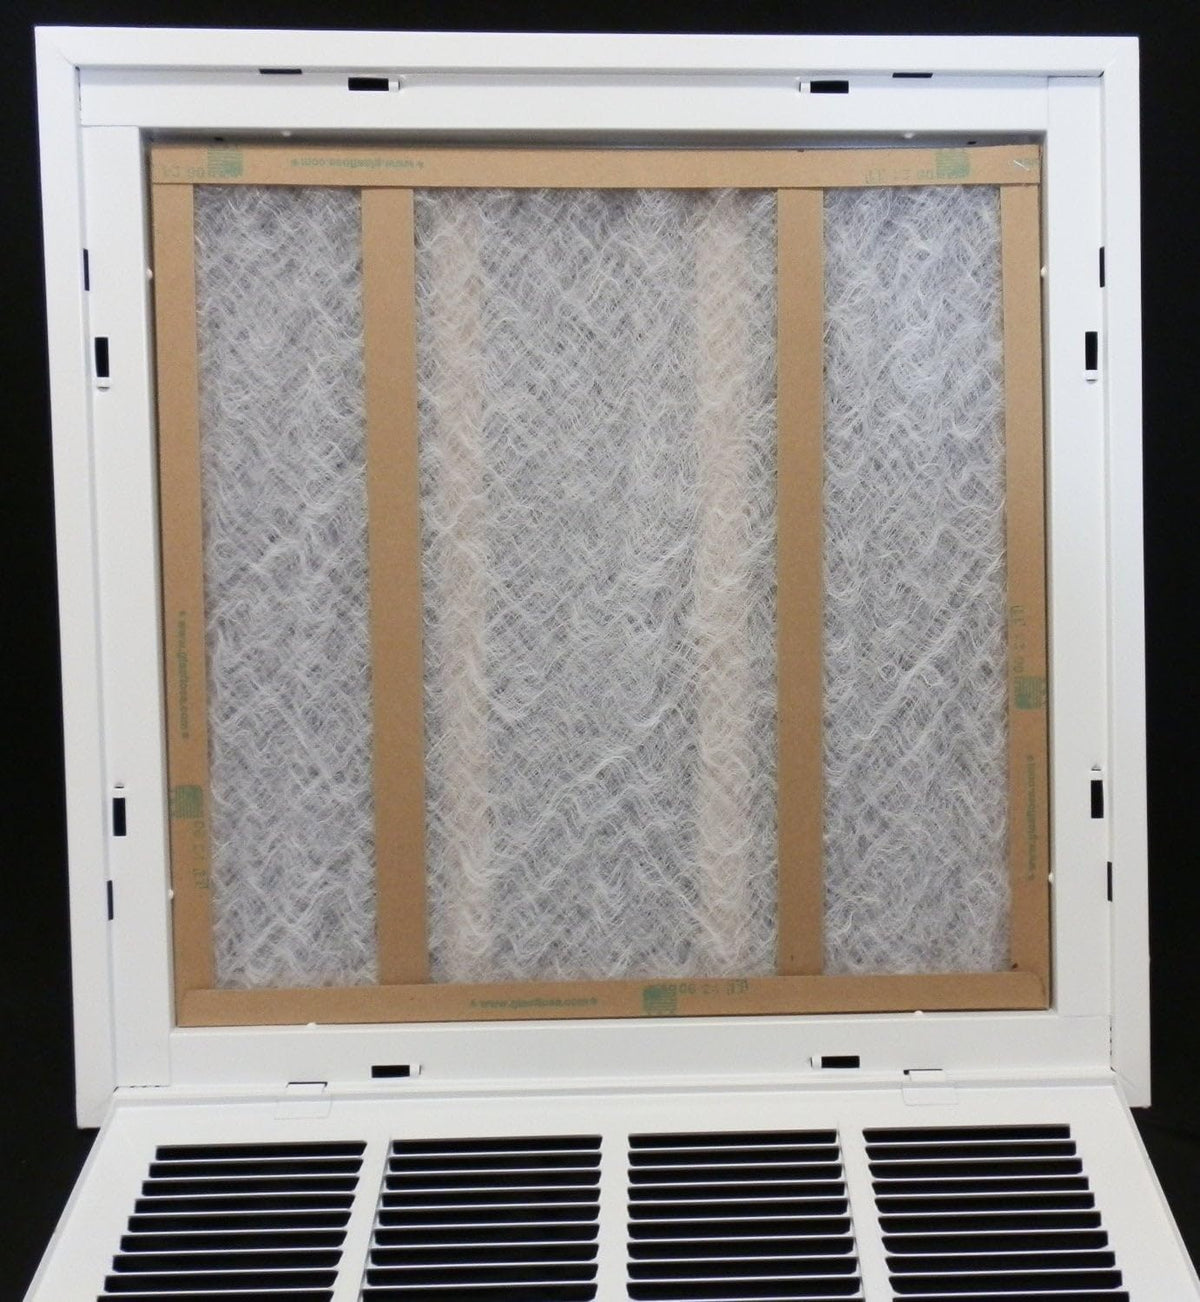 22&quot; X 16&quot; Steel Return Air Filter Grille for 1&quot; Filter - Removable Frame - [Outer Dimensions: 24 5/8&quot; X 18 5/8&quot;]